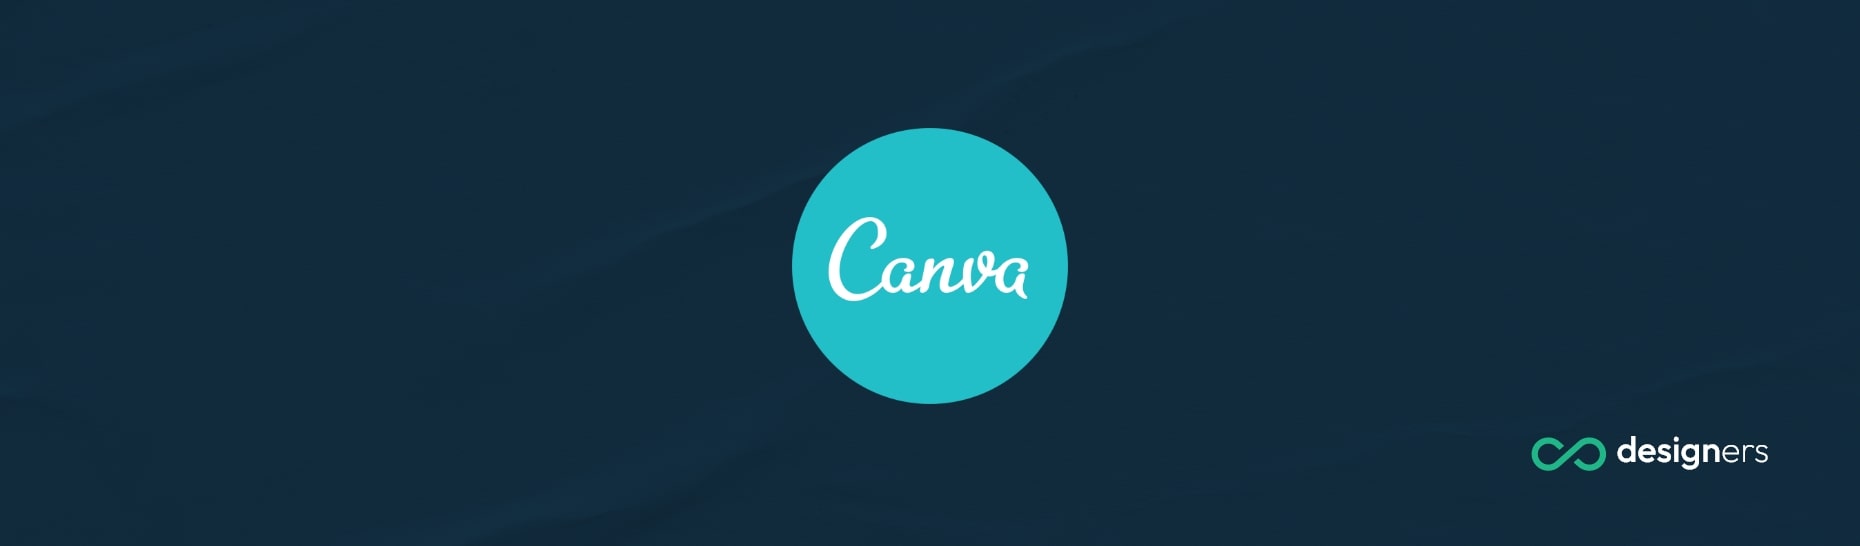 Are Canva Images Vector?